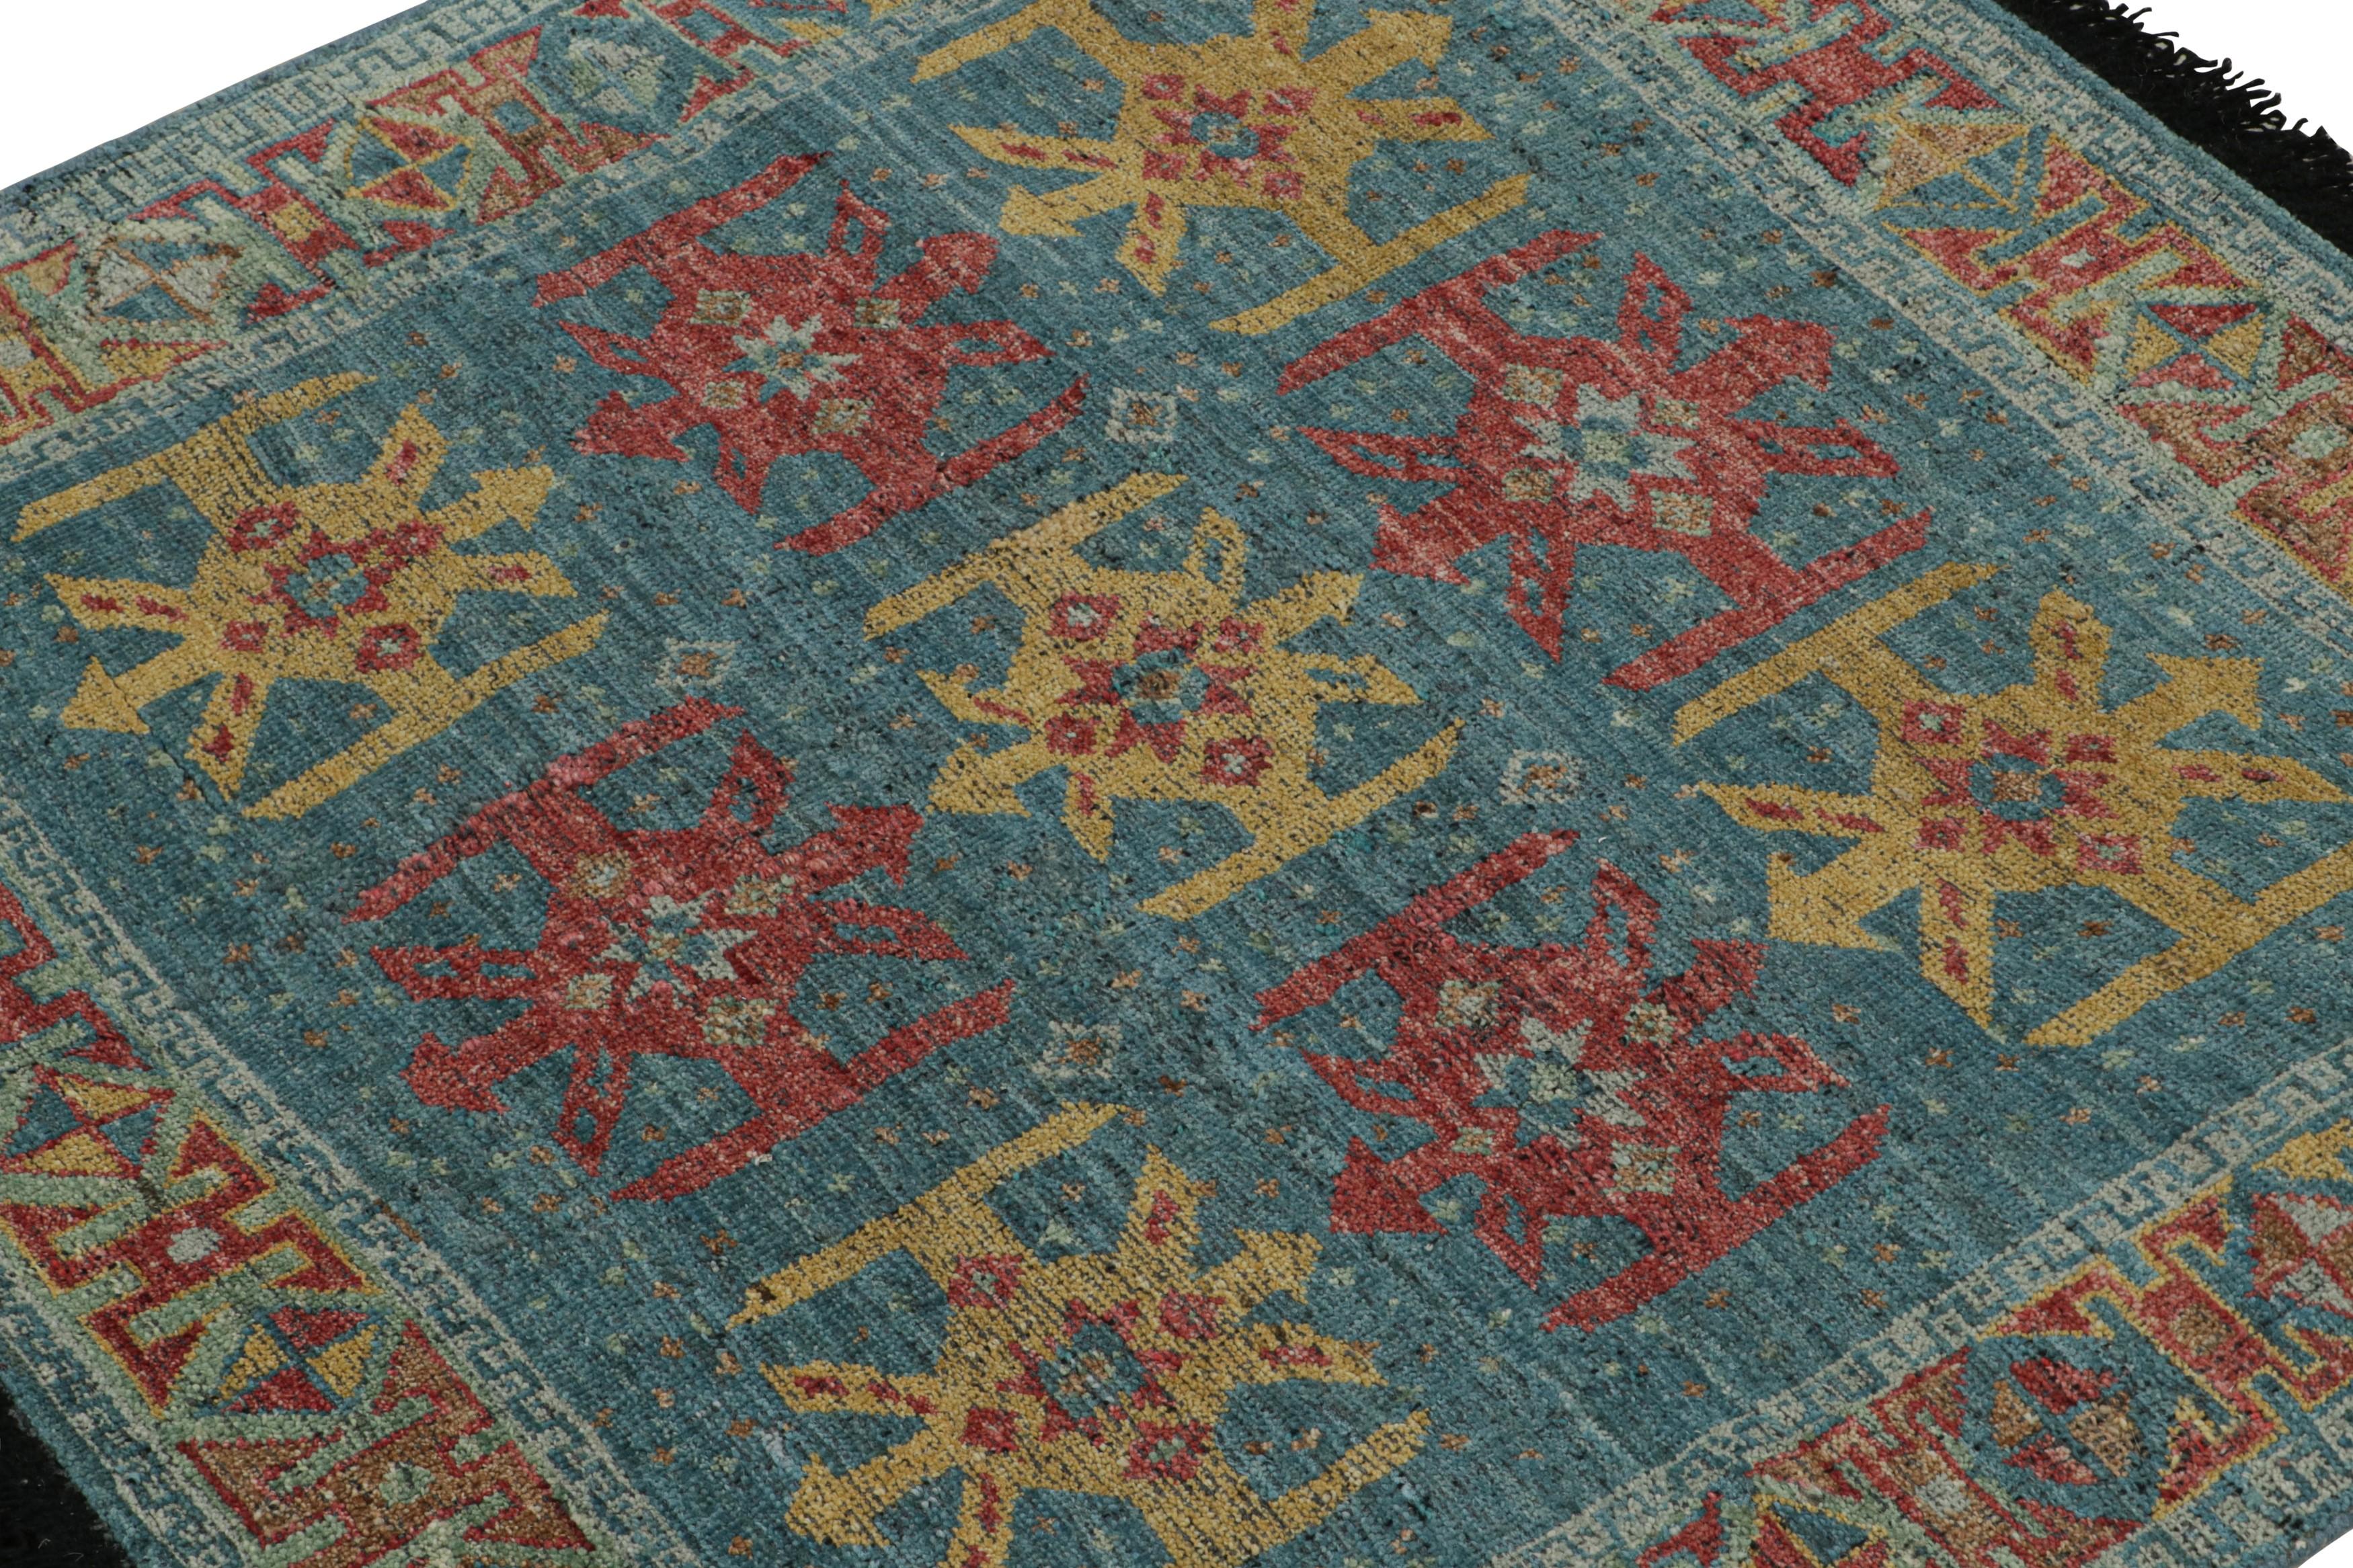 Hand-Knotted Rug & Kilim’s Tribal Style Custom Rug in Blue, Red & Gold Geometric Patterns For Sale